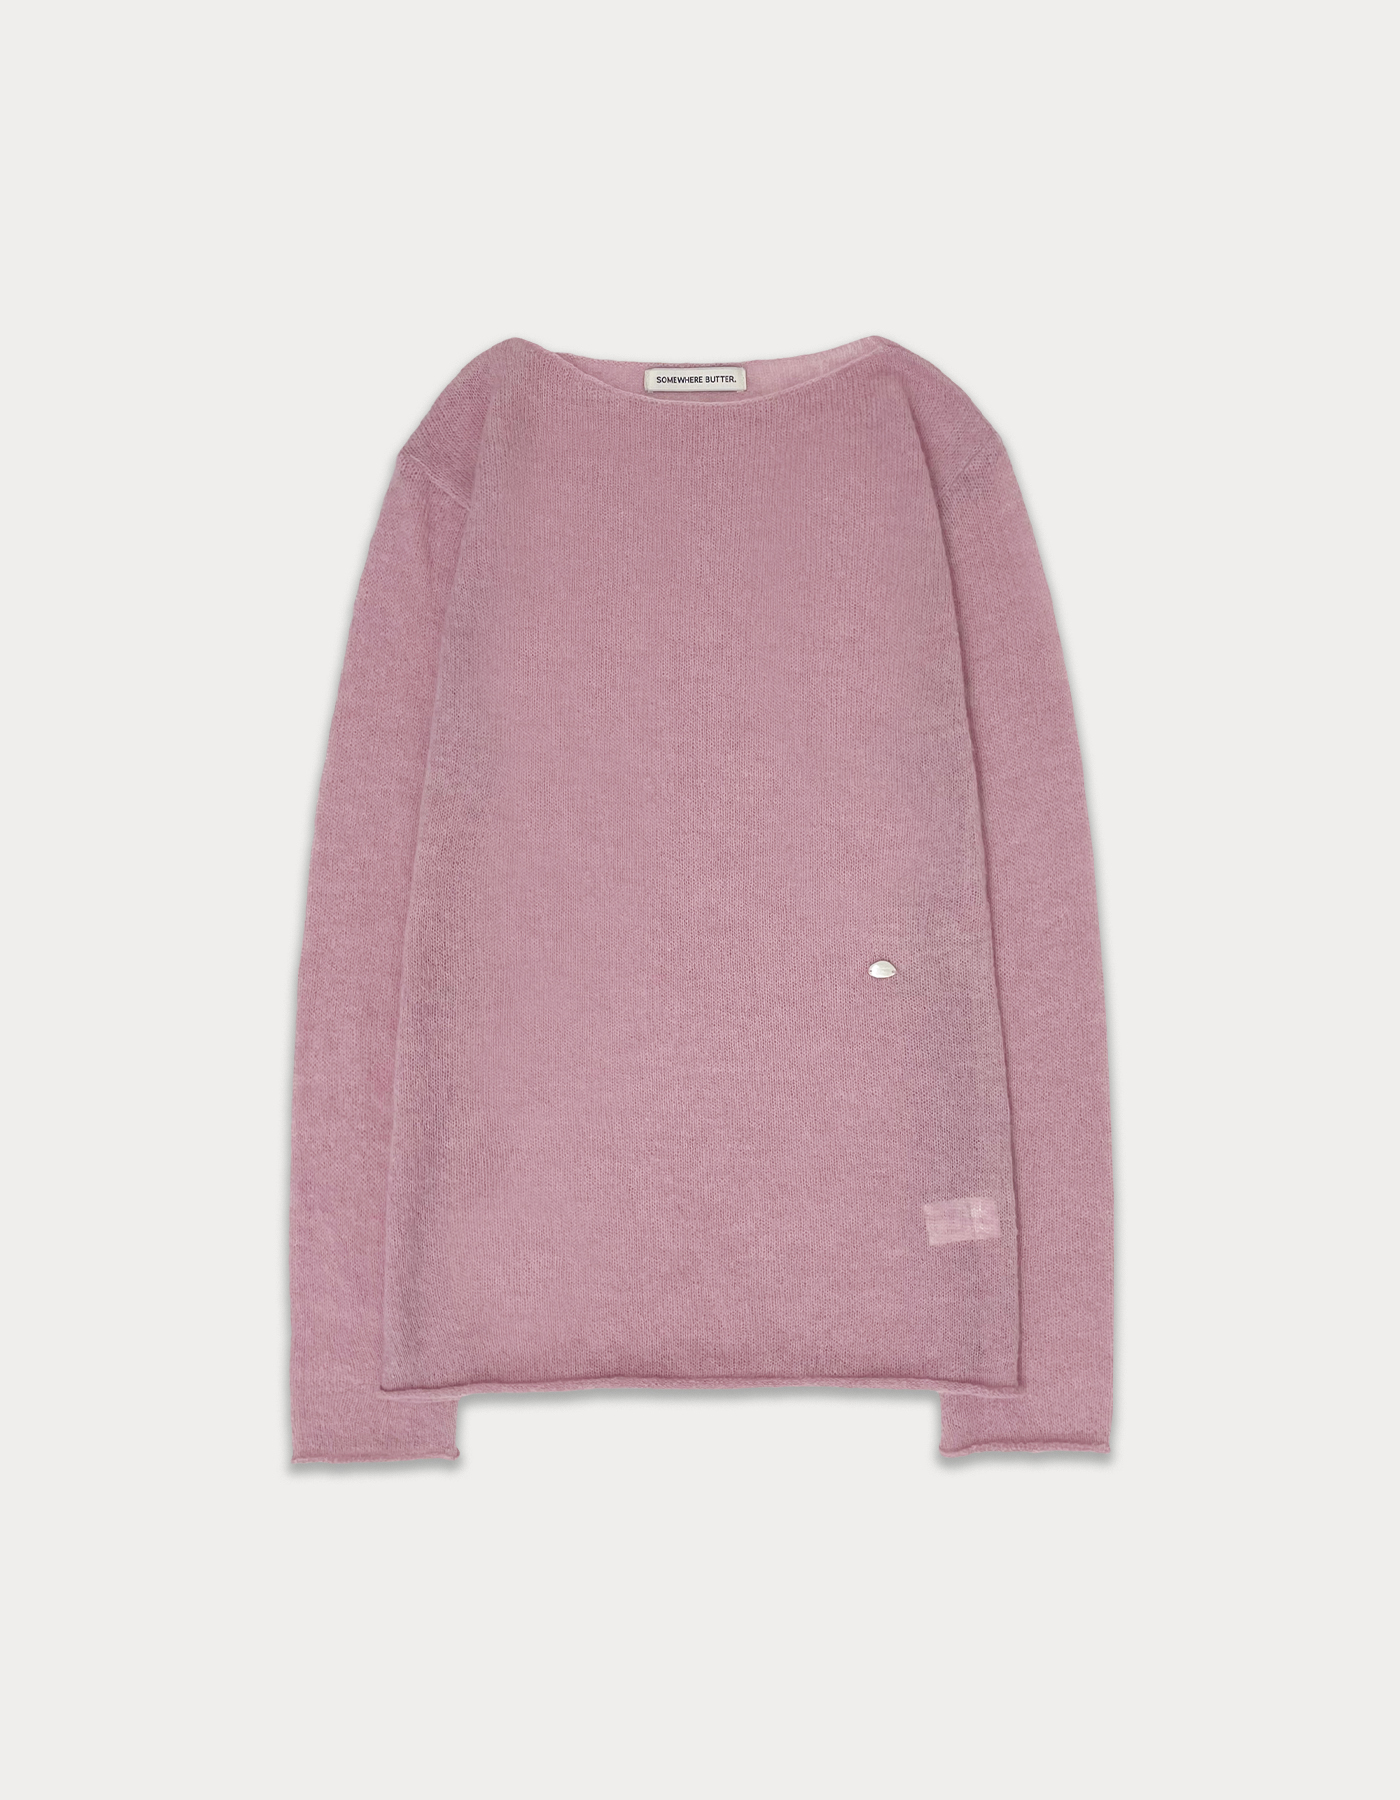 [4th Order 4.30 출고] See-through long sleeve knit - pink